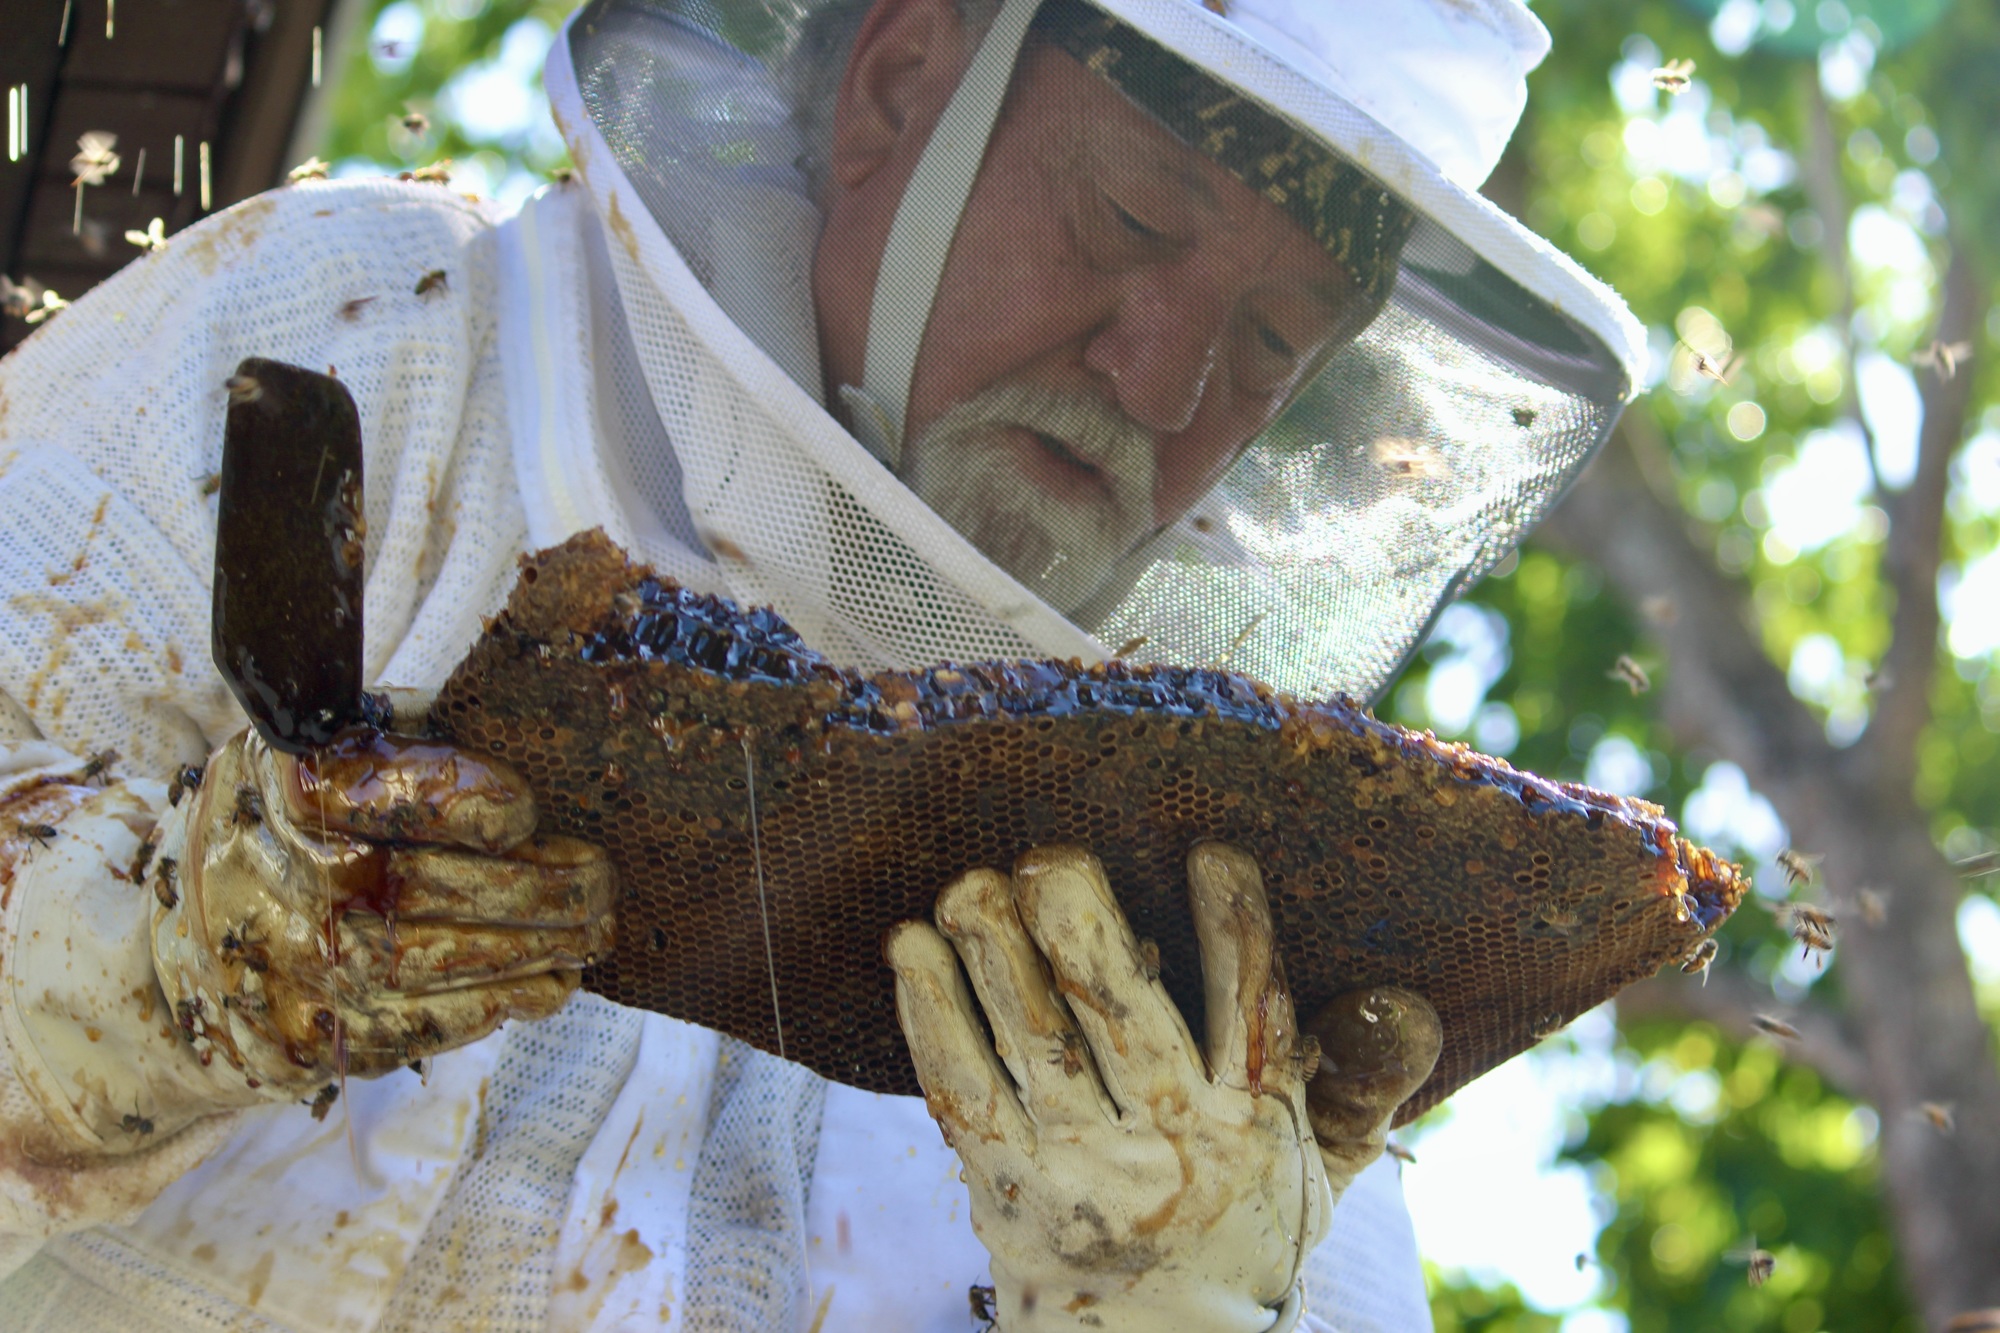 Tony Woodard inspects the honeycomb looking for larva. (Photo by Lesley Dwyer)